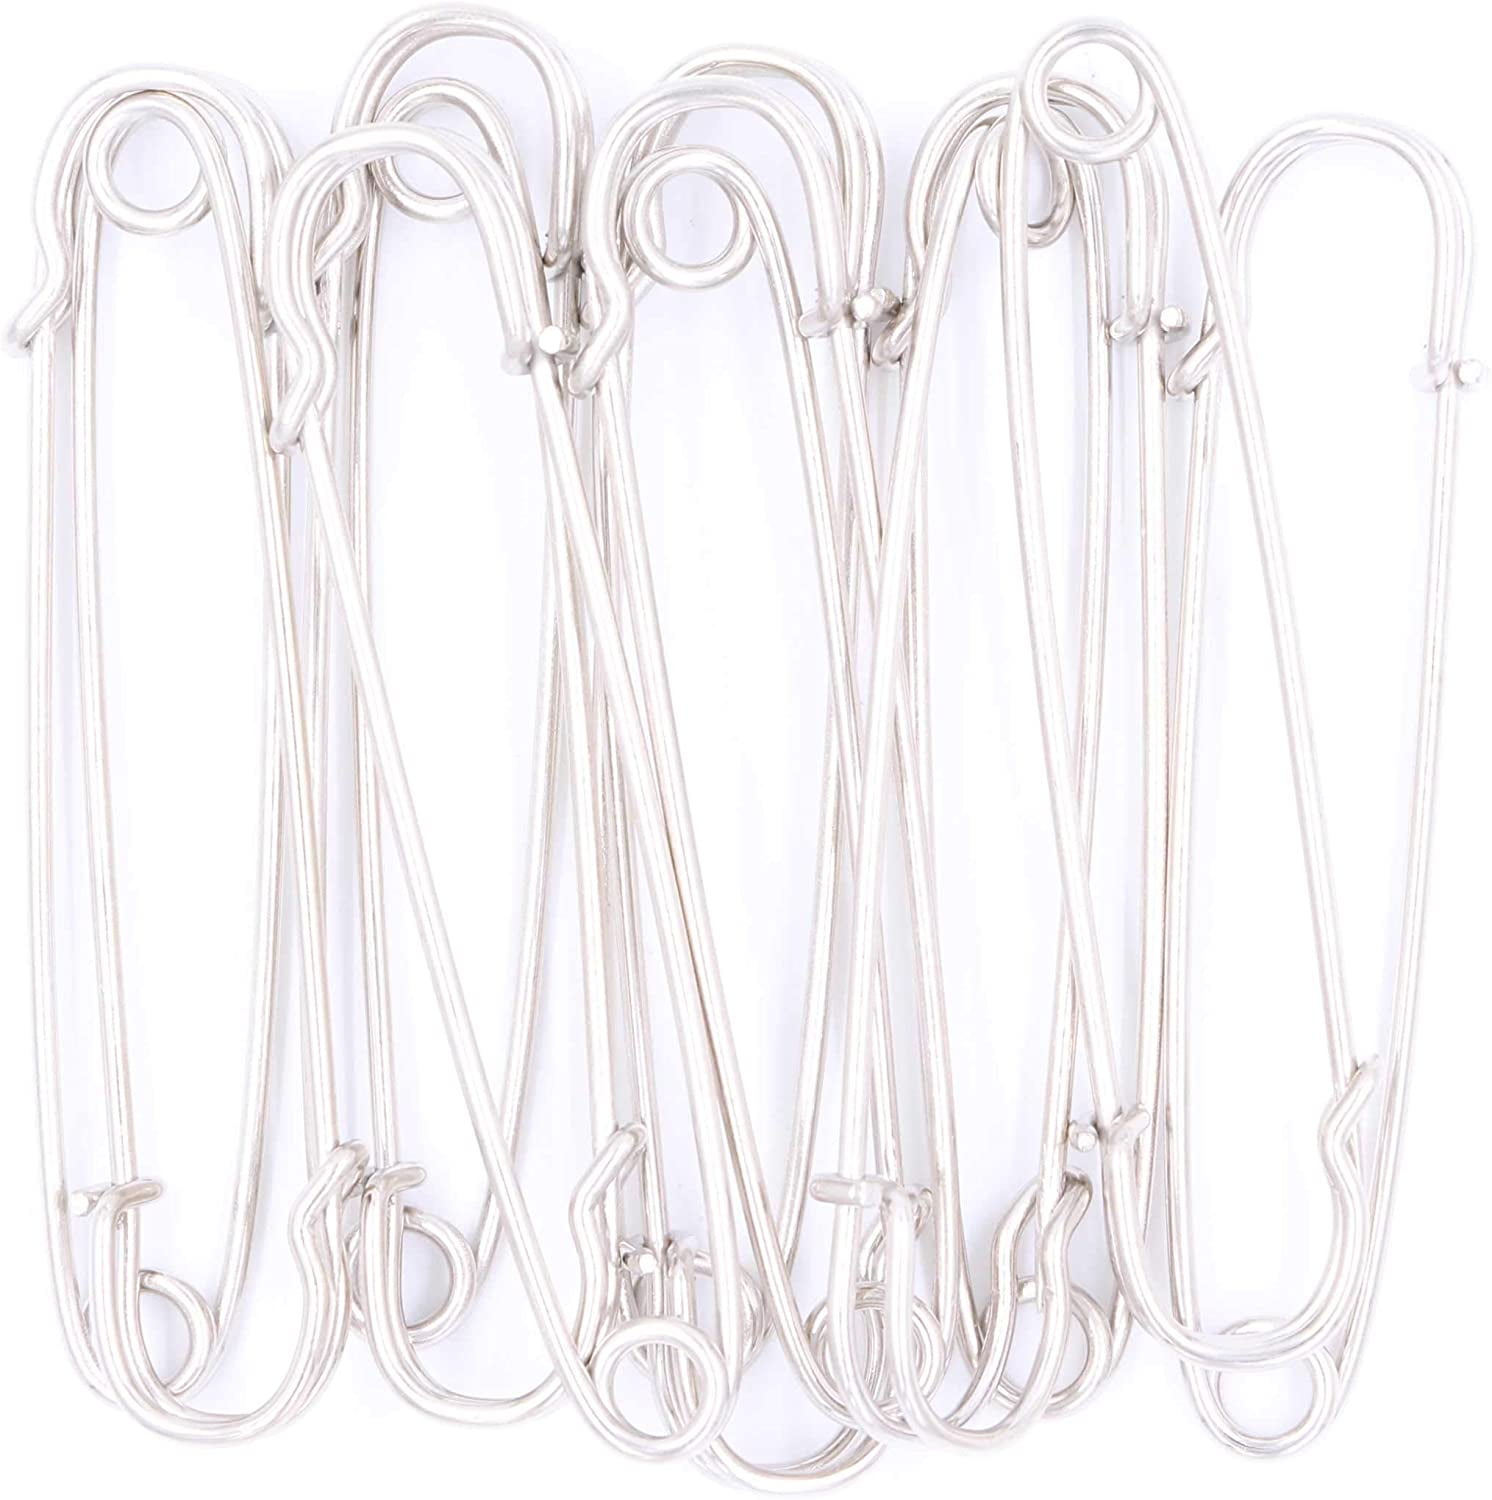 CenterZ 50 Count 3 inch Safety Pins - Heavy Duty Nickel Plated Stainless Steel Extra Strong Large Pin Bulk for Blankets, Skirts, Kilts, Knitted